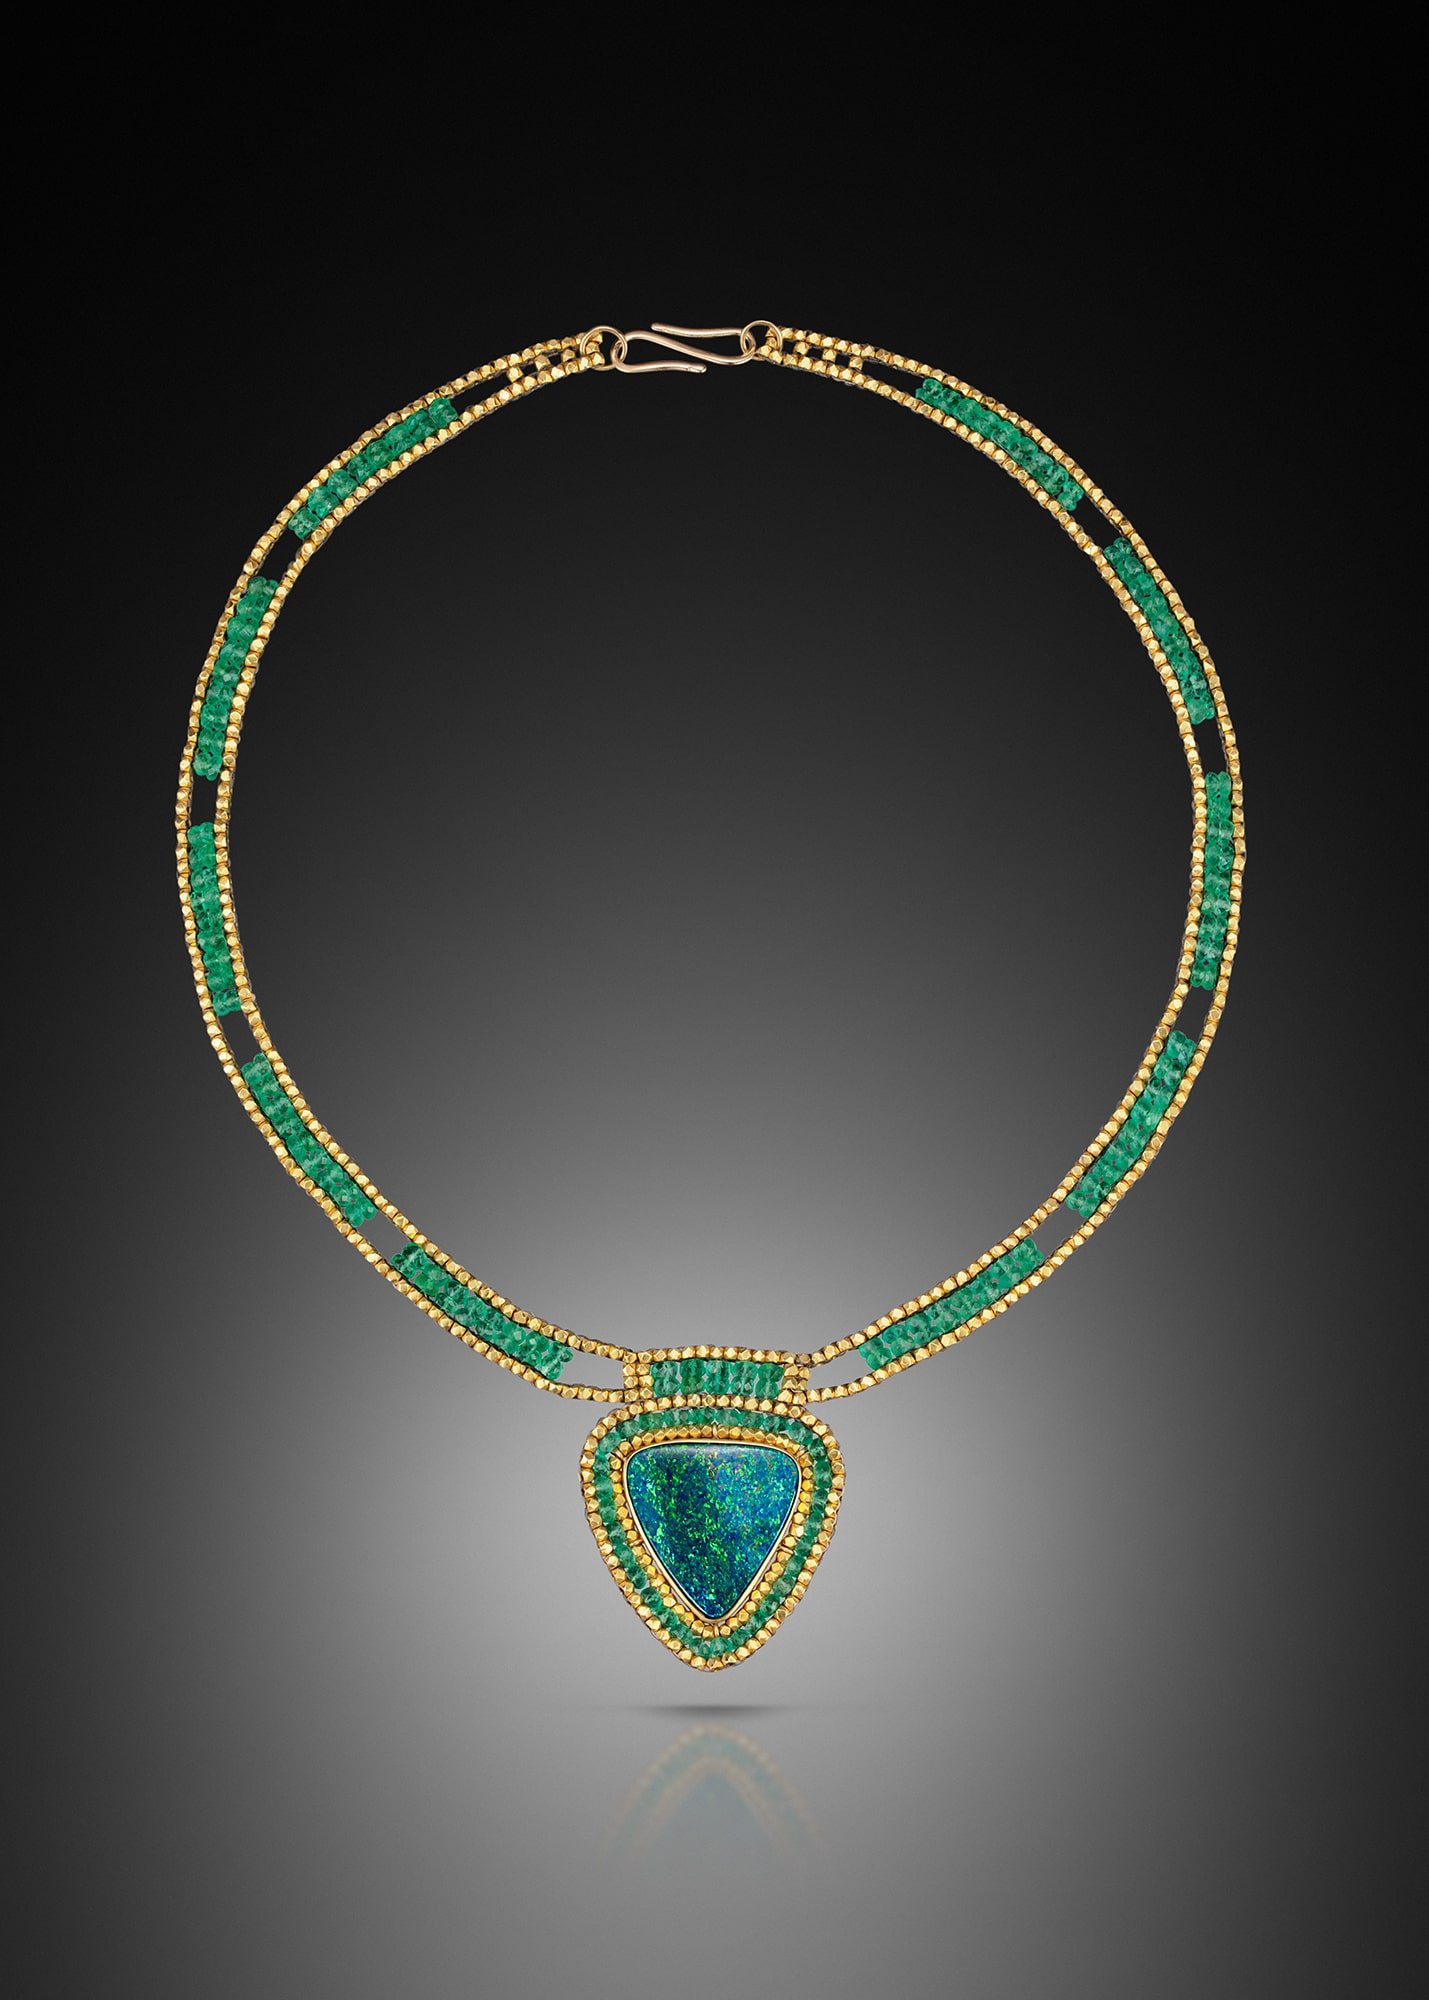 Opal and Emerald Collar. This hand woven necklace is made from emerald and 18k gold beads. The pendant is hand-fabricated from 18k gold, set with an Australian opal, surrounded by a woven frame.